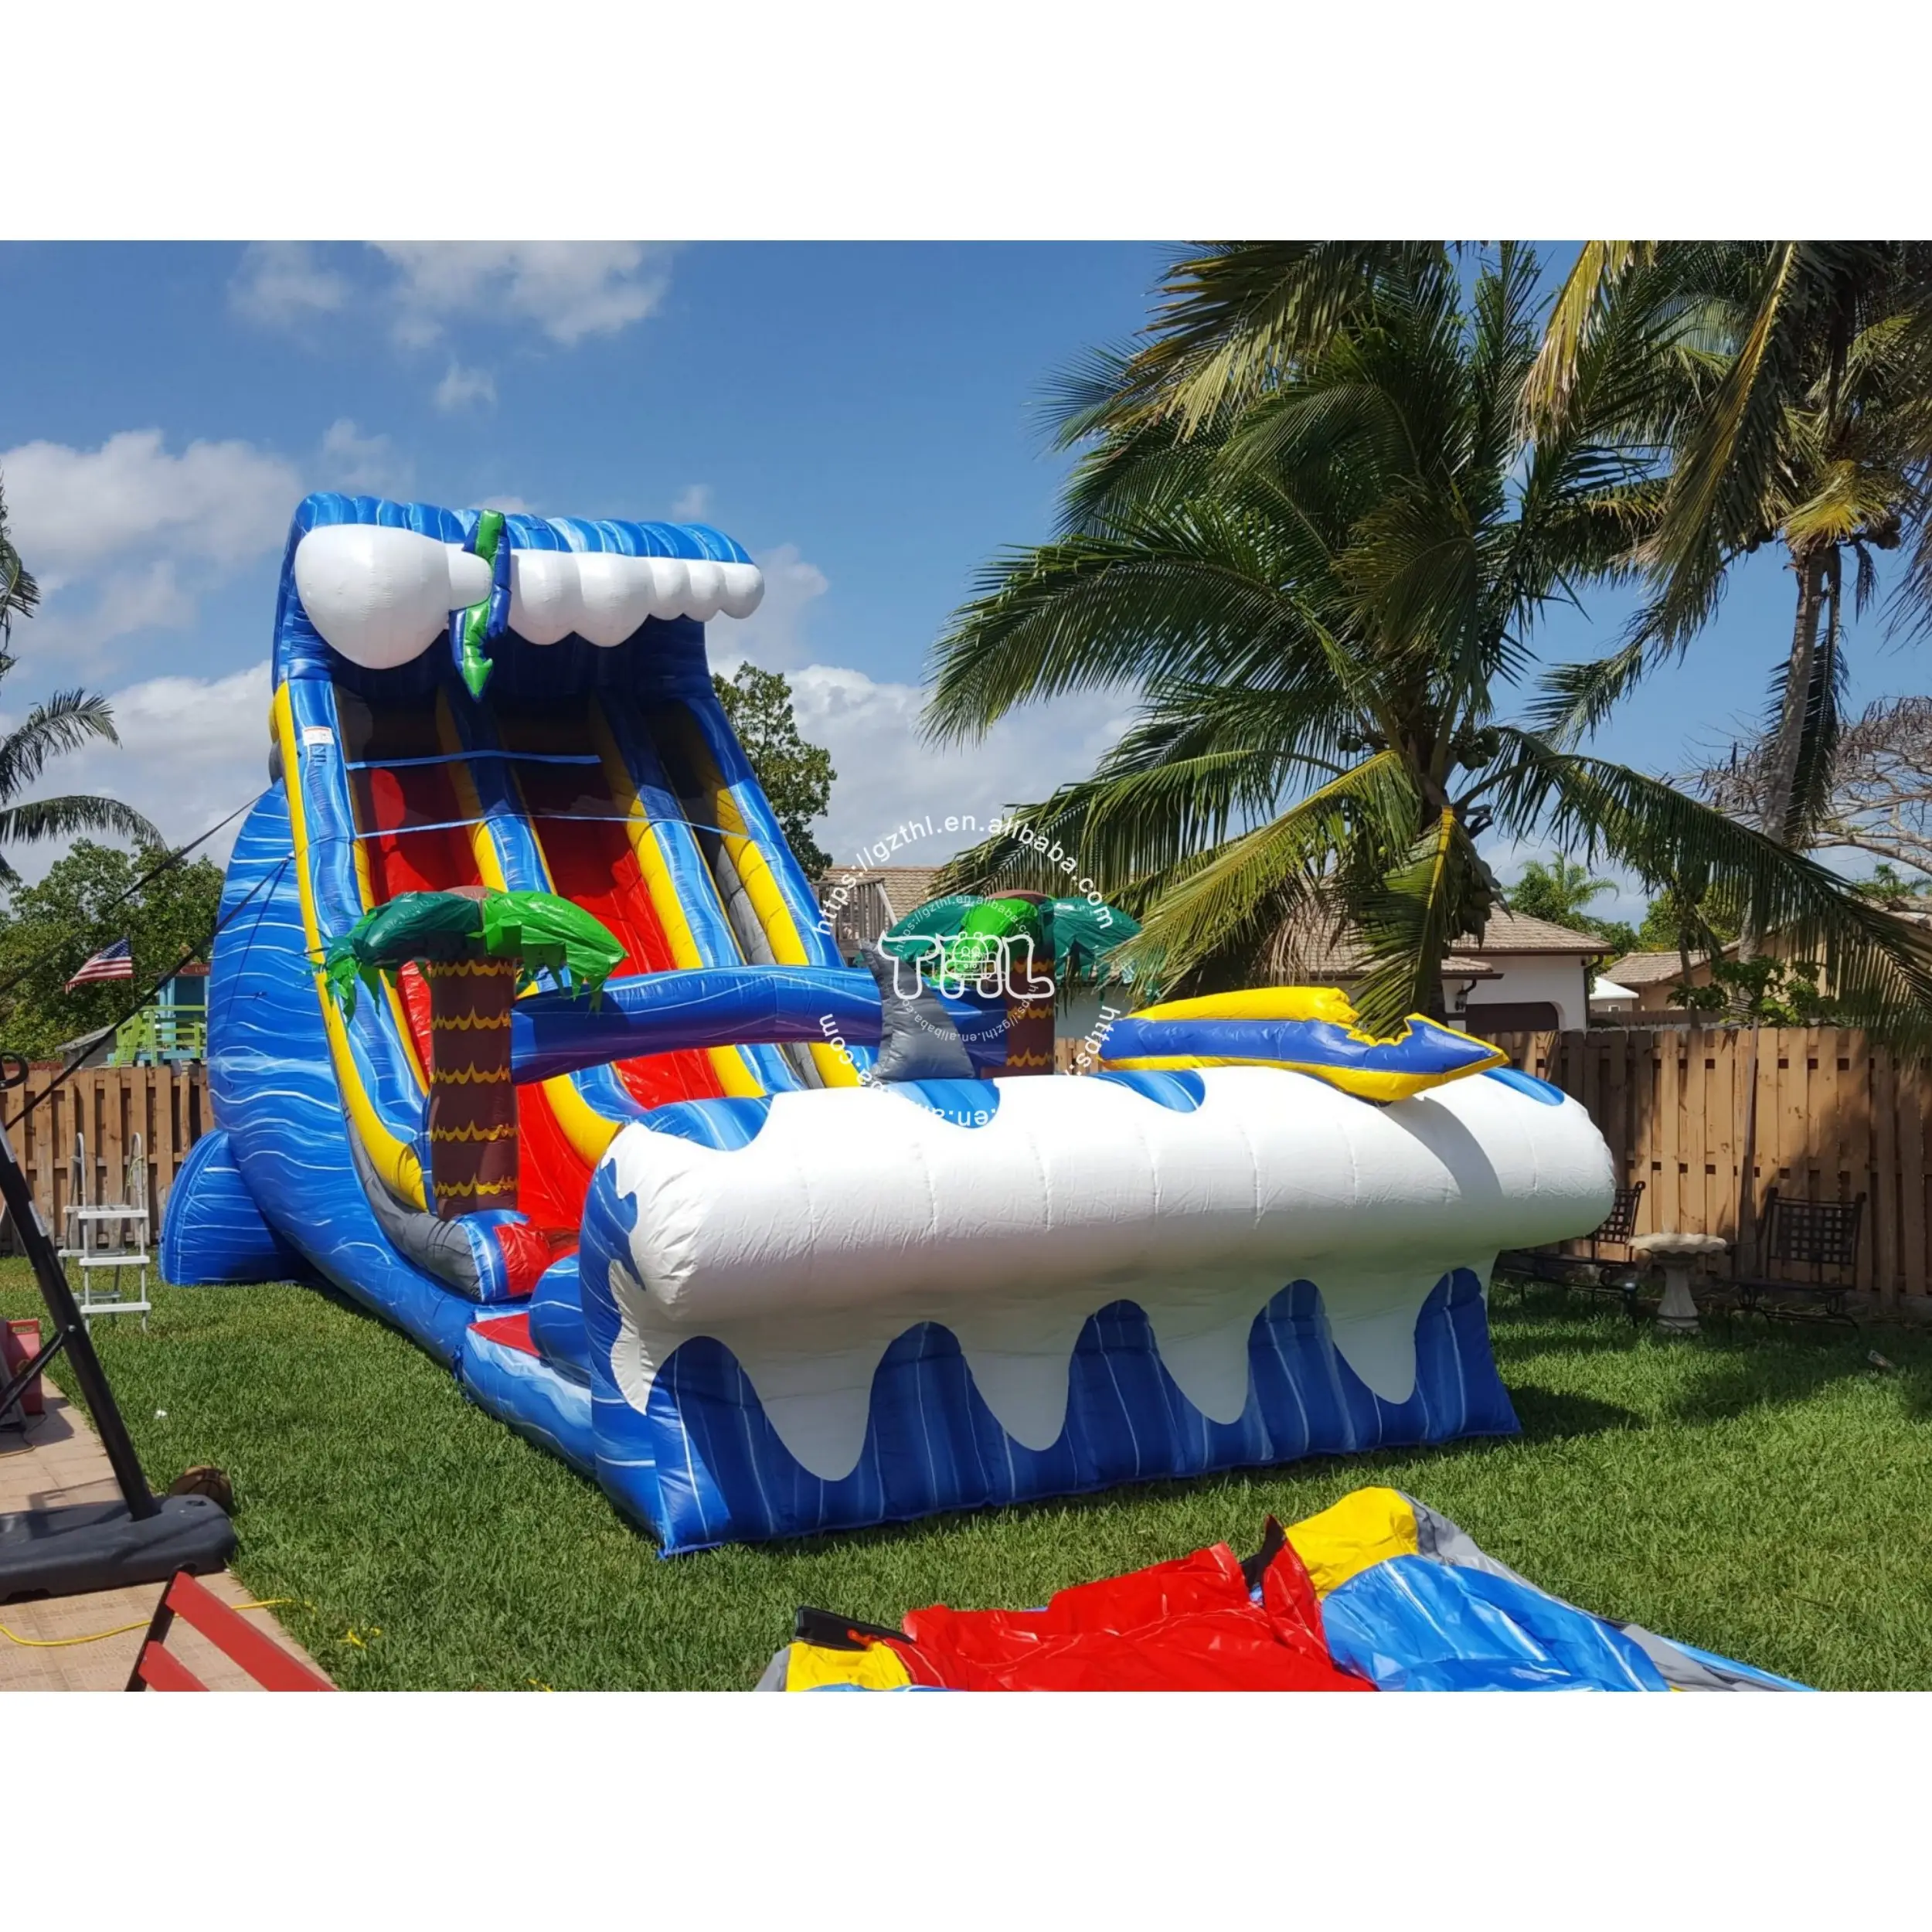 China lake adults commercial cheap big inflatable park for sale backyard water slides